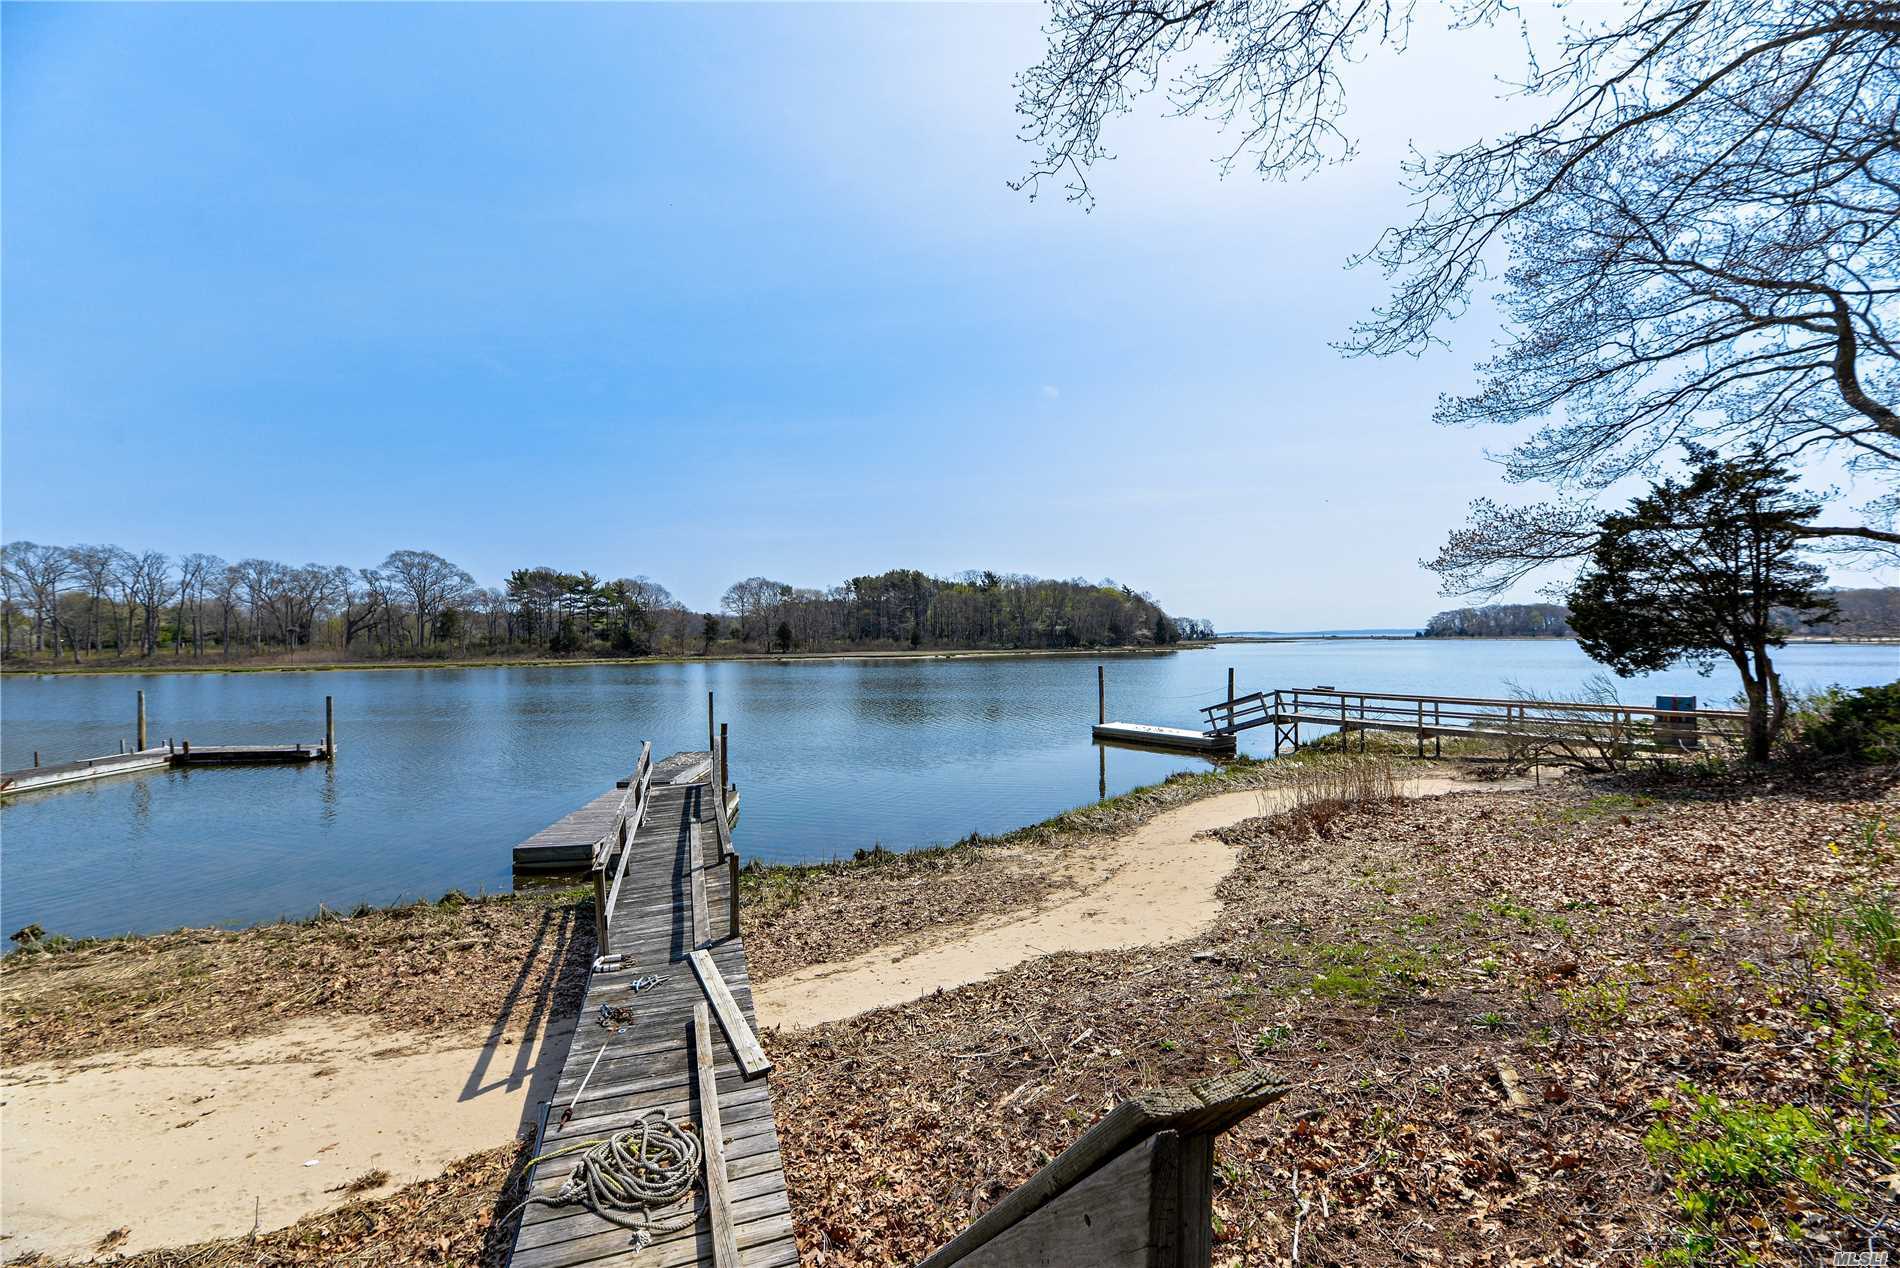 Location Says It All! 60&rsquo;S Ranch, Waiting To Be Re-Imagined. 2 Bed. 1.5 Ba. 110 Feet Of Sandy Richmond Creek Front. Dock W/Deep Water Access To Peconic Bay. 2 Fireplaces. Hardwood Floors. Vast Views Of Mouth Of The Creek And Bay Beyond.